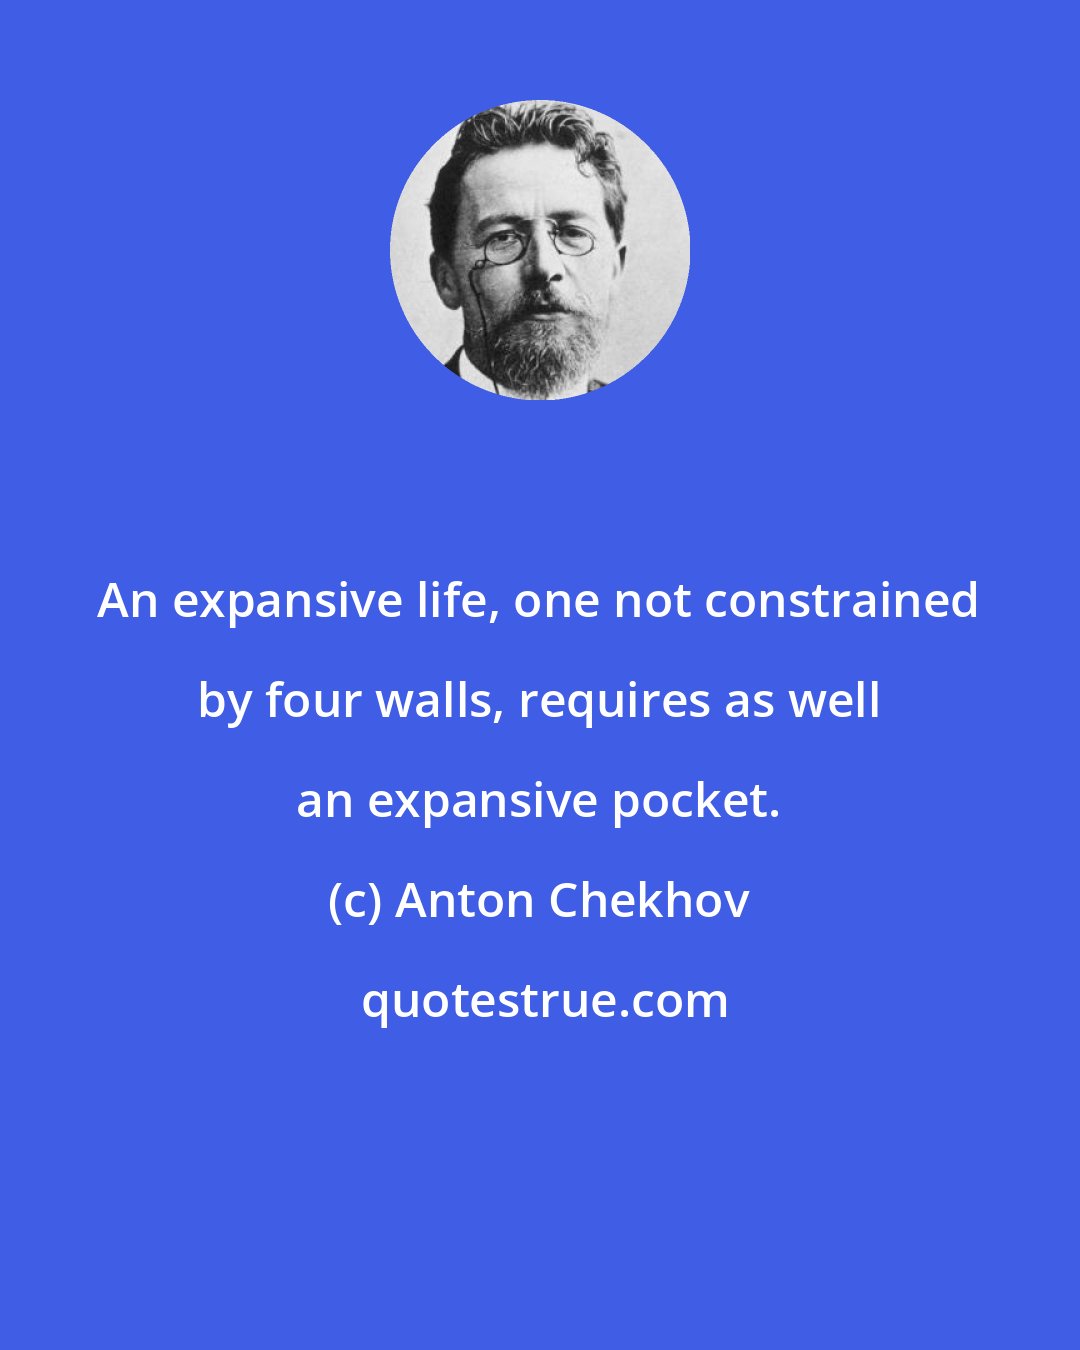 Anton Chekhov: An expansive life, one not constrained by four walls, requires as well an expansive pocket.